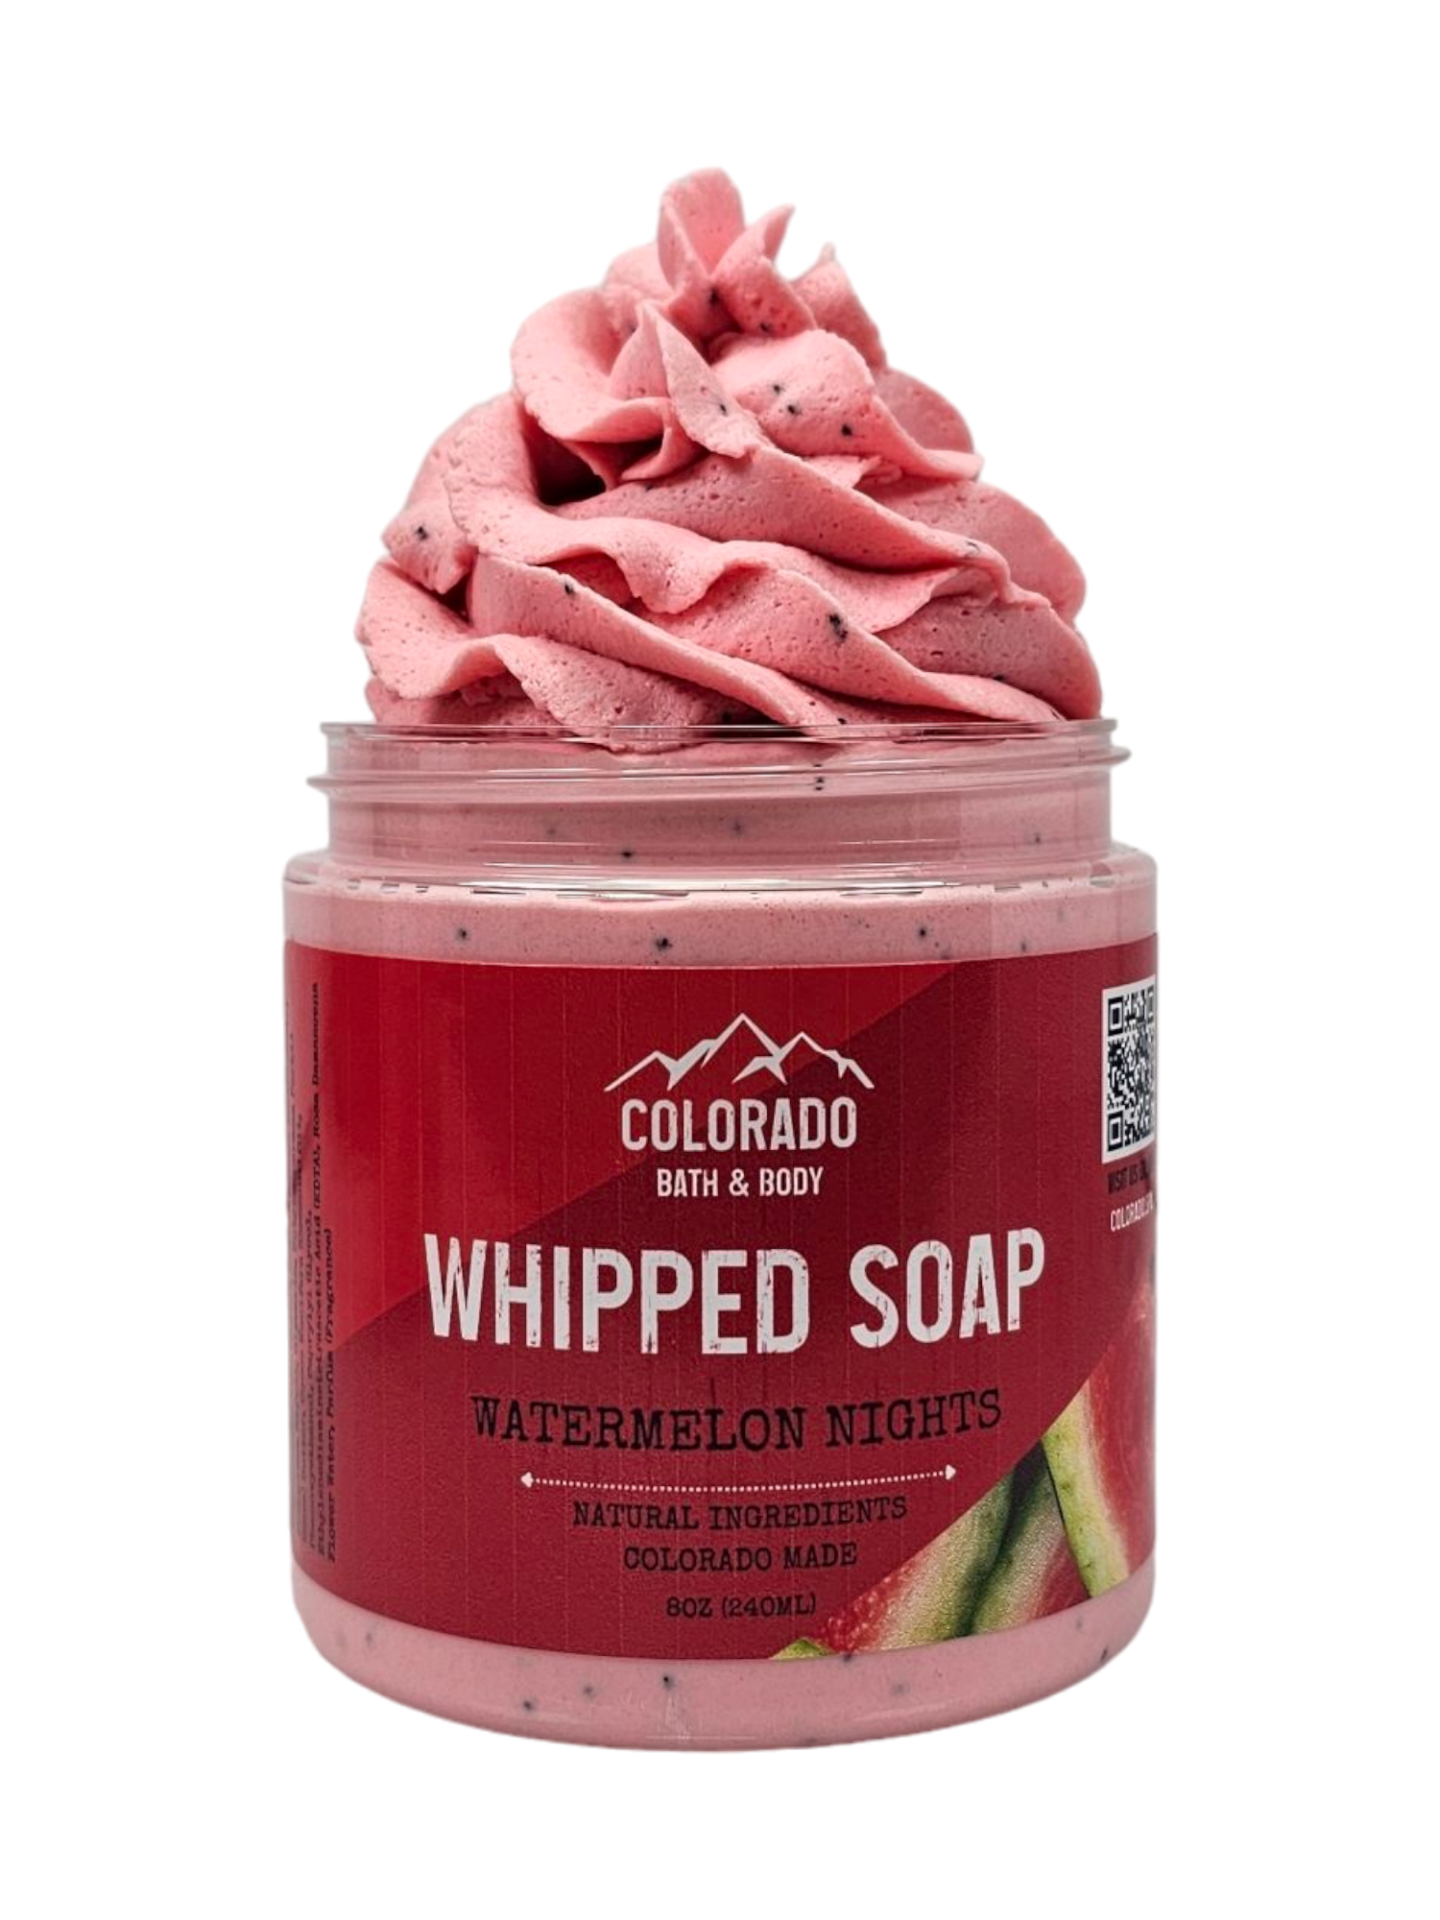 Watermelon Nights Whipped Soap